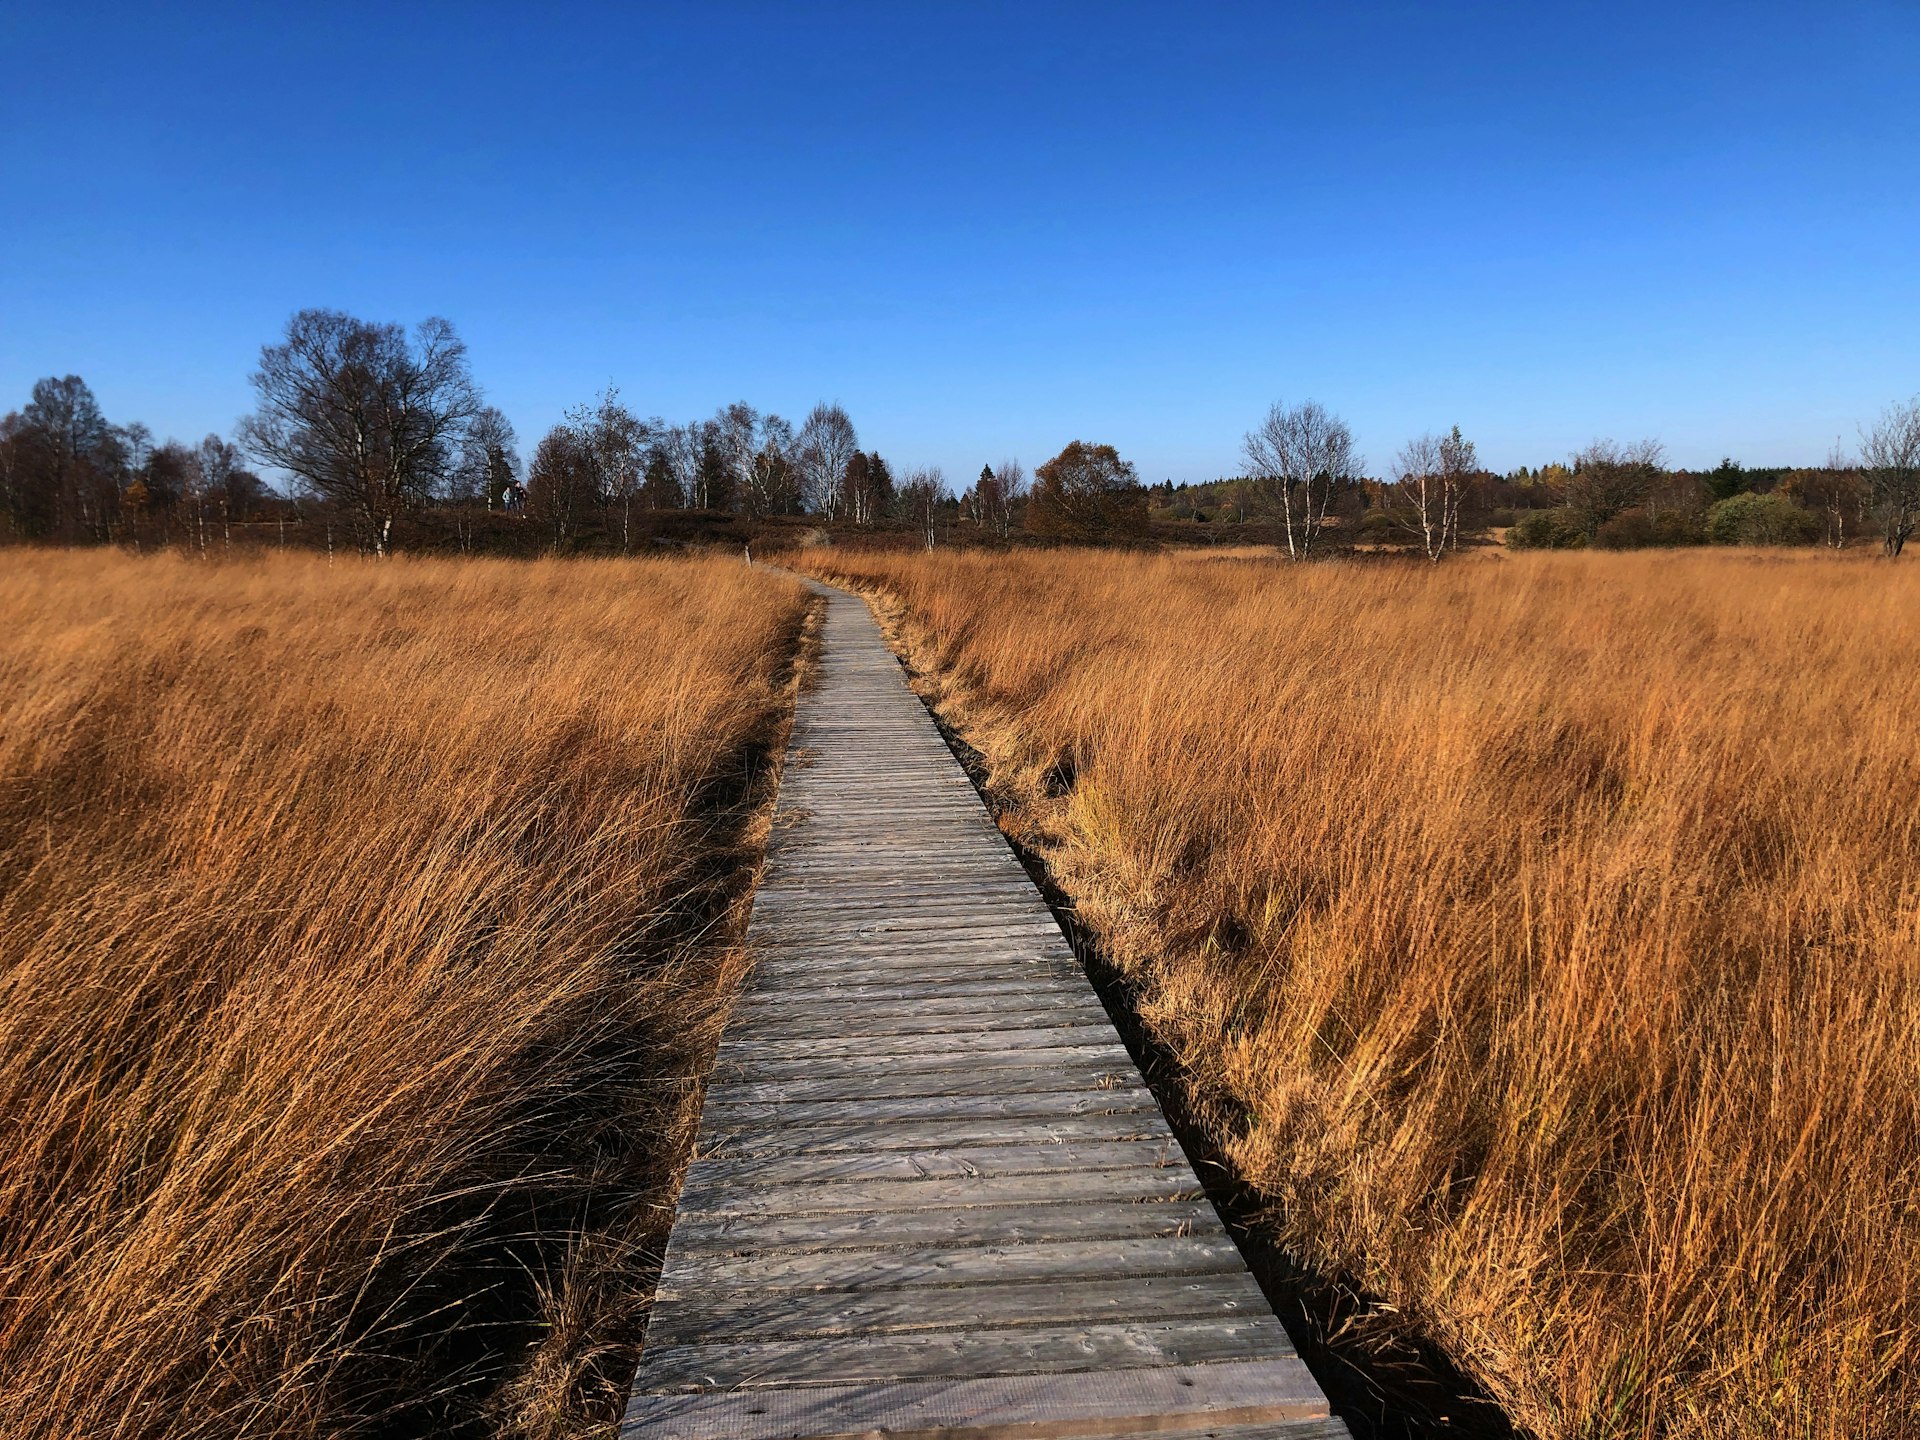 a wooden walkway in a field of tall grass